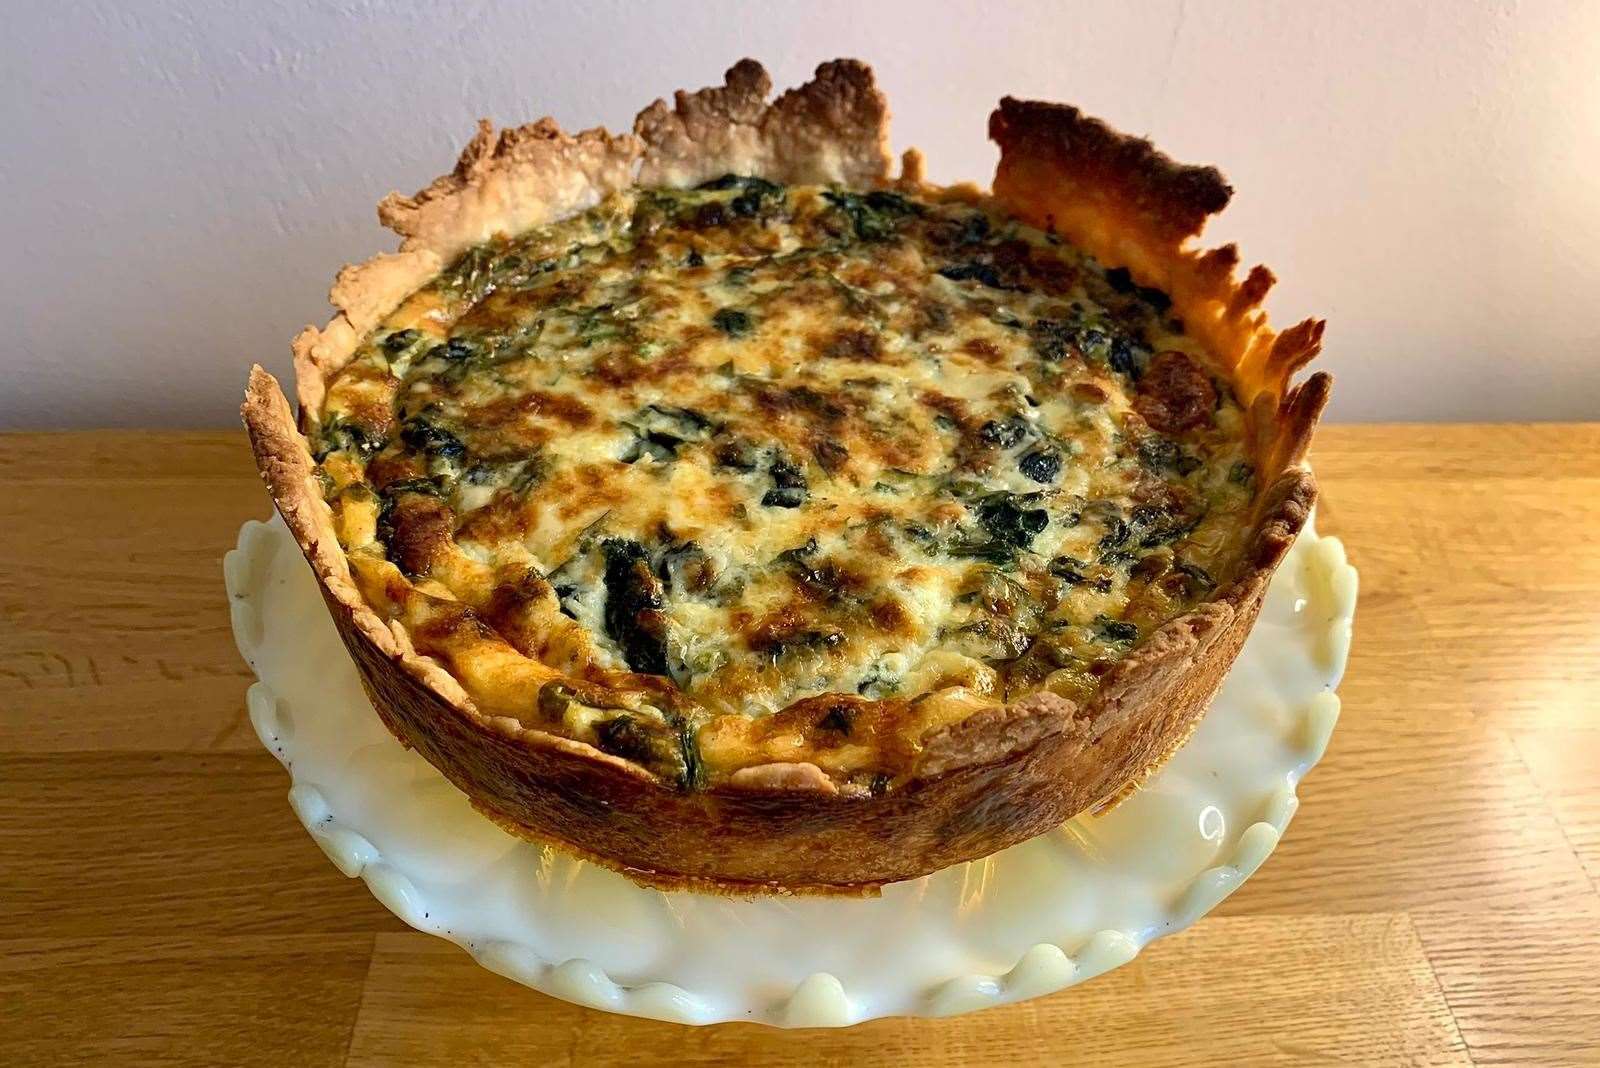 sg quiche 4Have you tried making a Coronation Quiche yet?